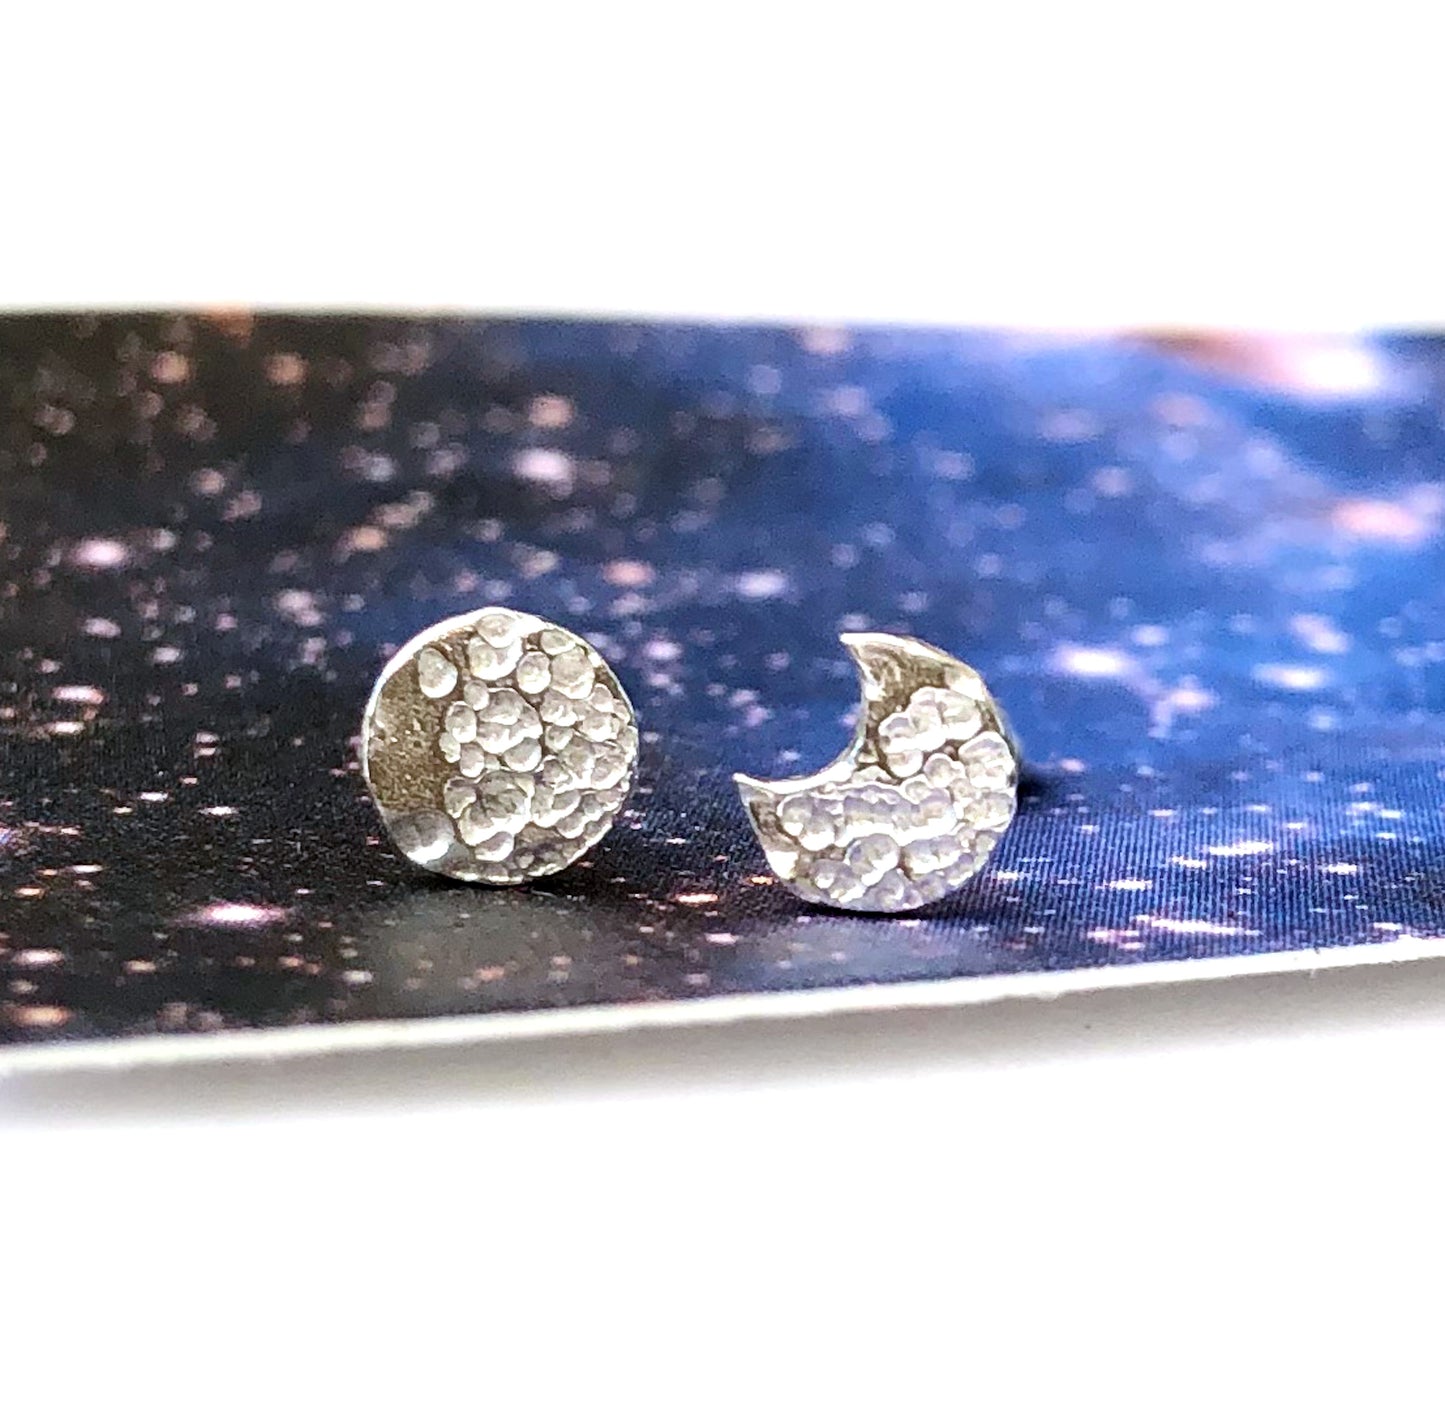 Sterling Silver Mini Mismatched Moon Earrings